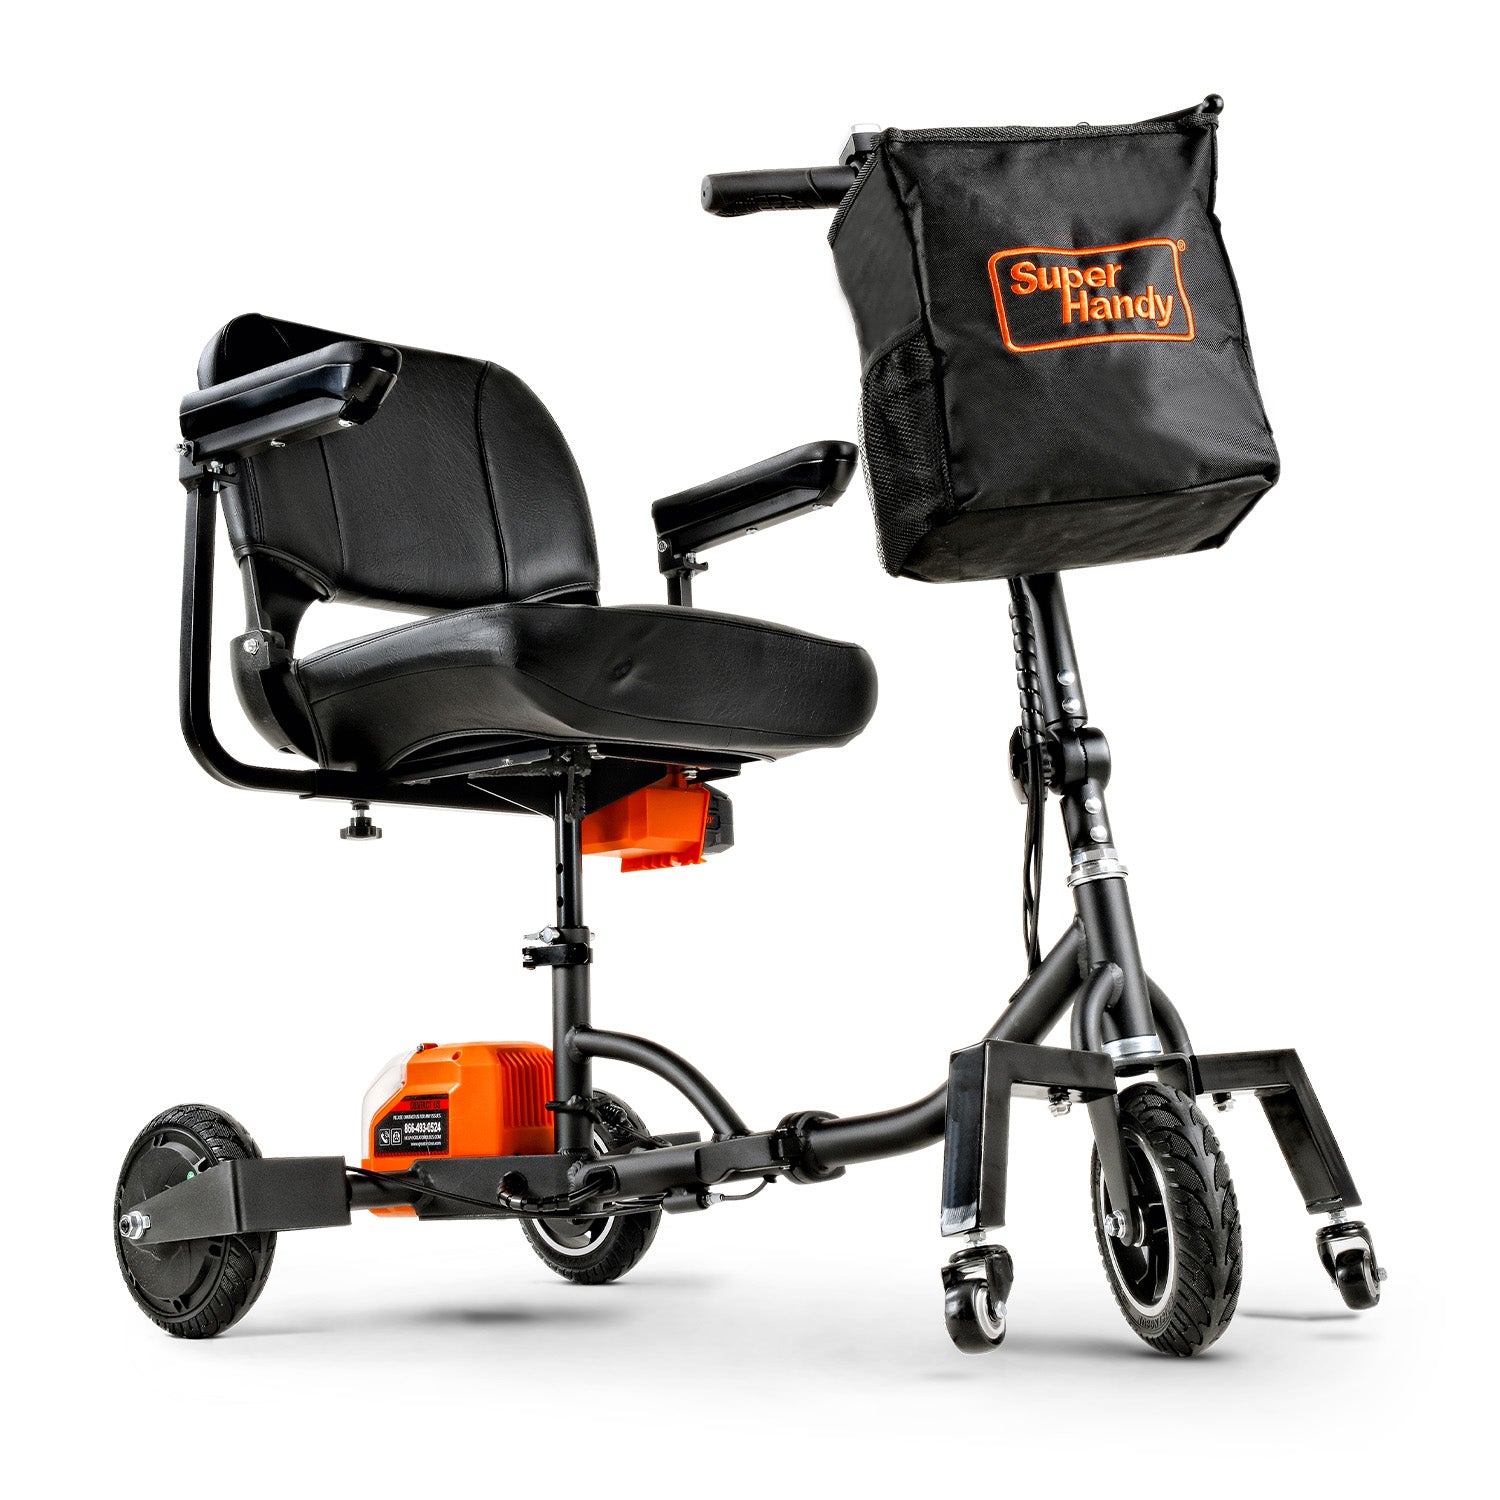 Passport Plus Mobility Scooter - 48V 2Ah Battery, 330Lb Max Weight